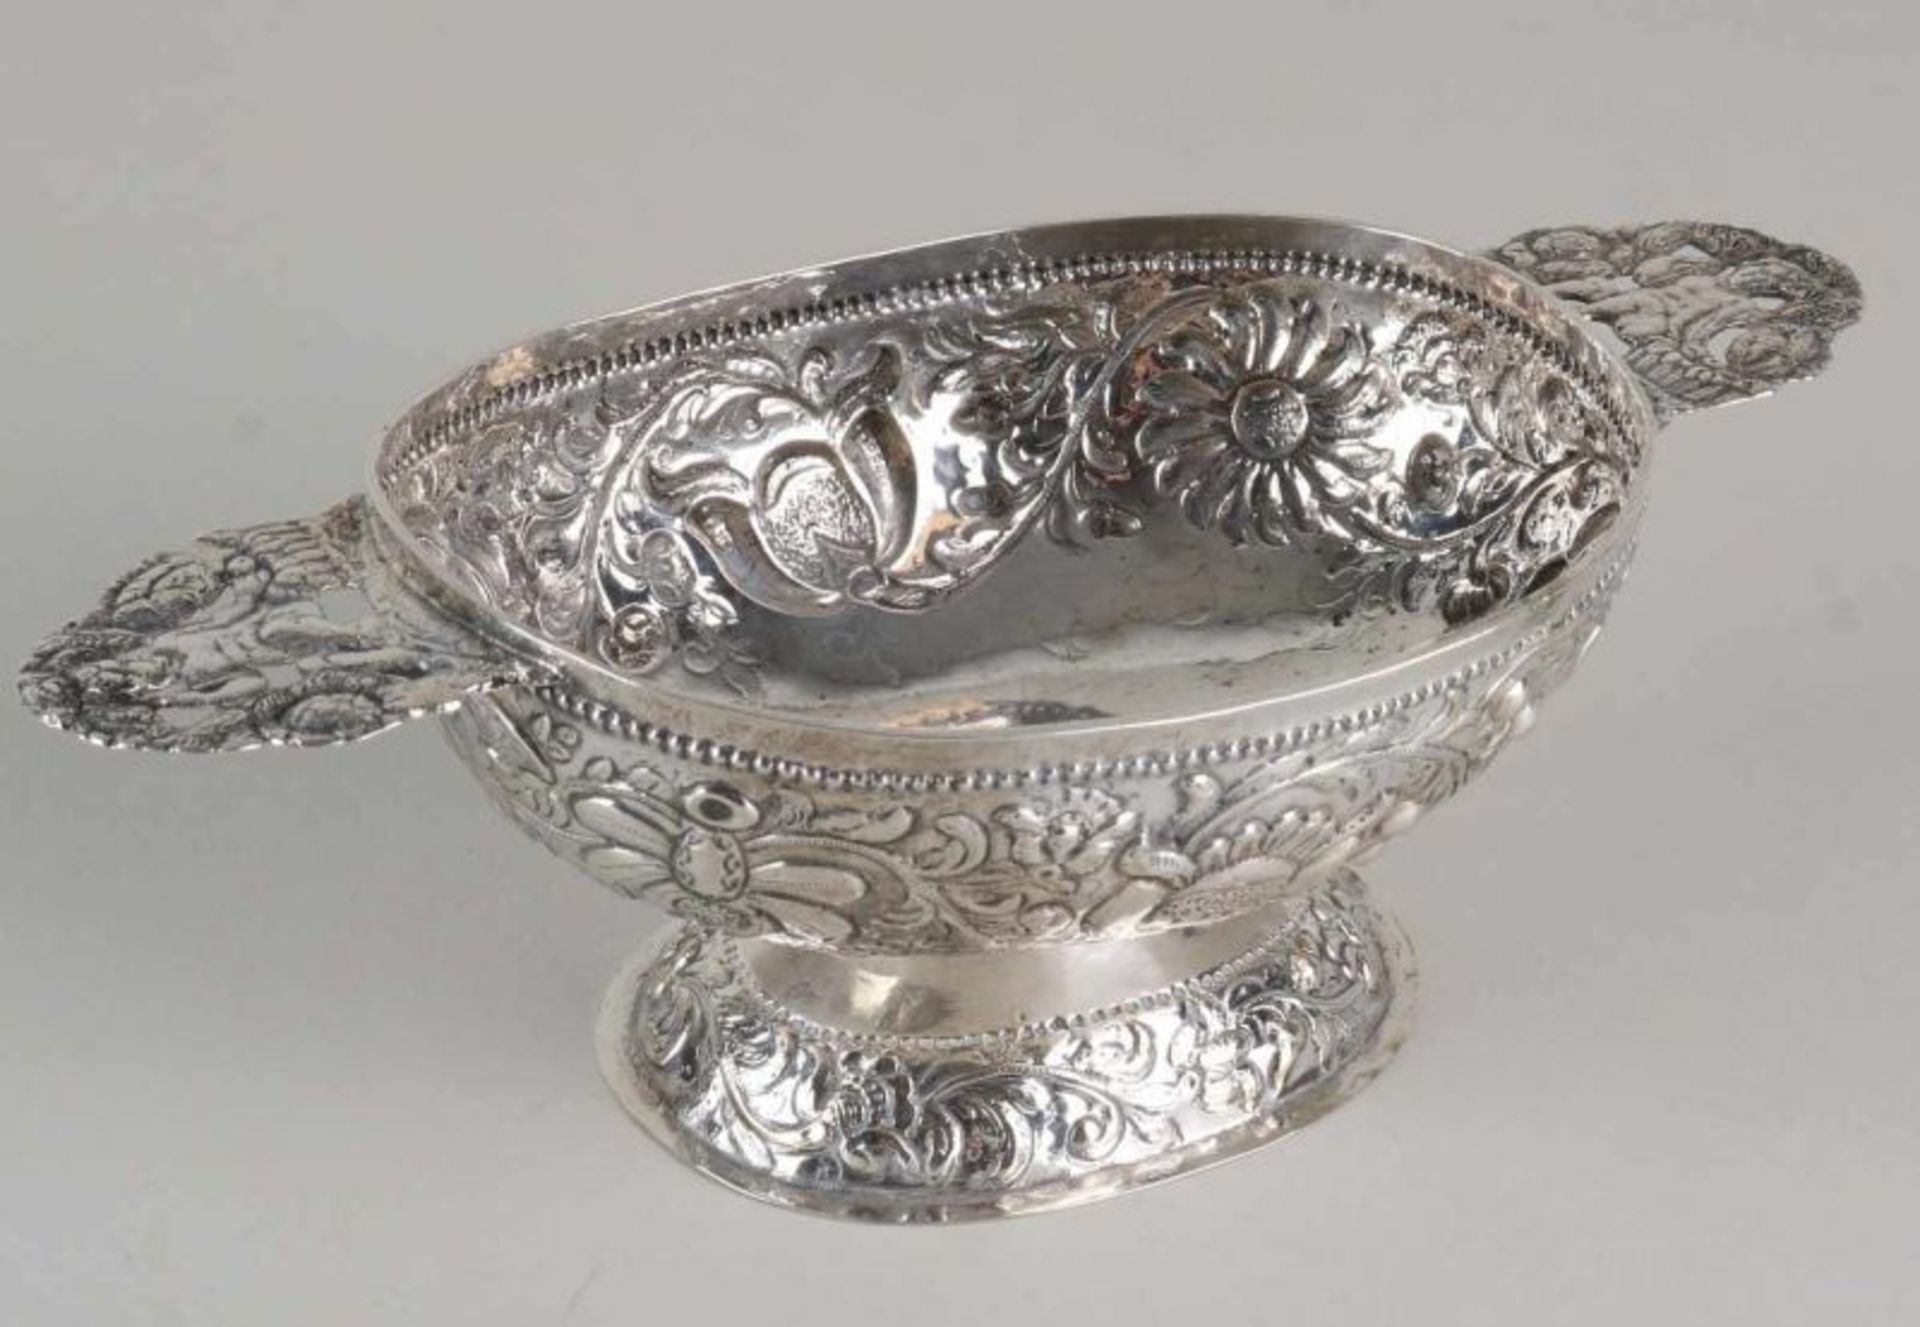 Frisian silver brandy bowl, 18th century, decorated with driven floral images, truss work and two